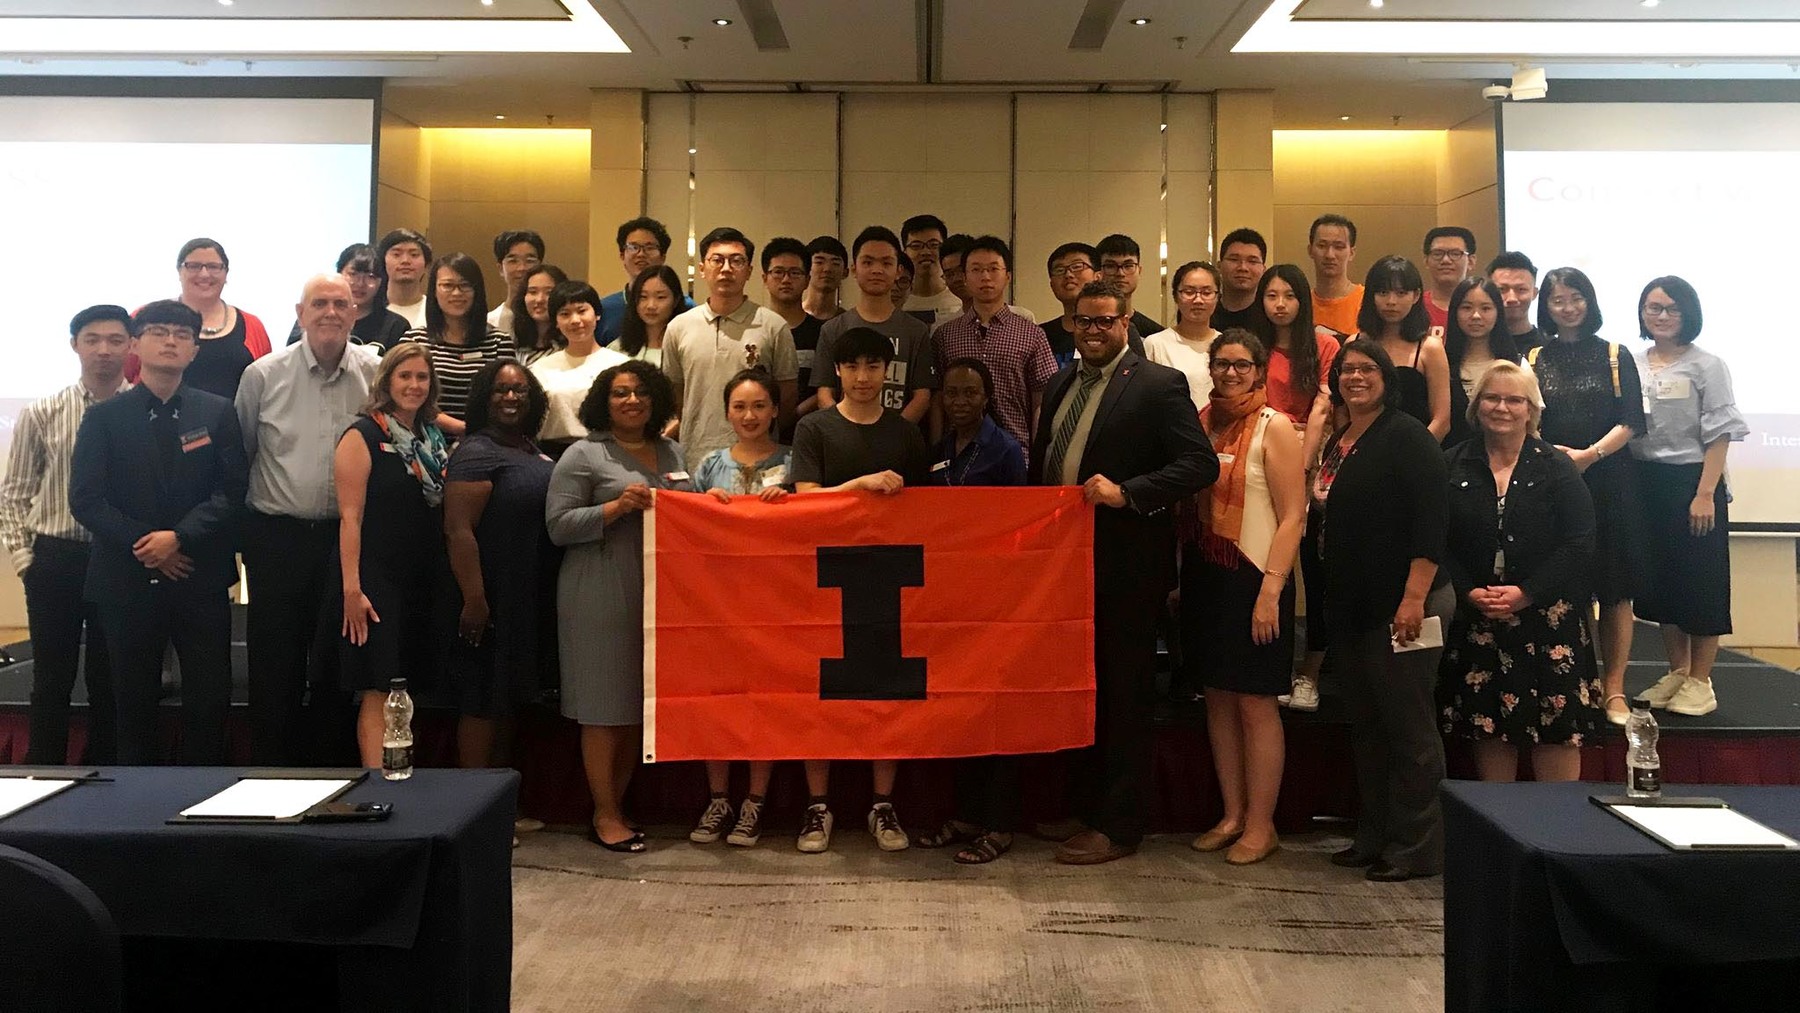 Lt. Joan Fiesta in China and South Korea assisting with the university's pre-arrival orientation sessions for incoming international students.